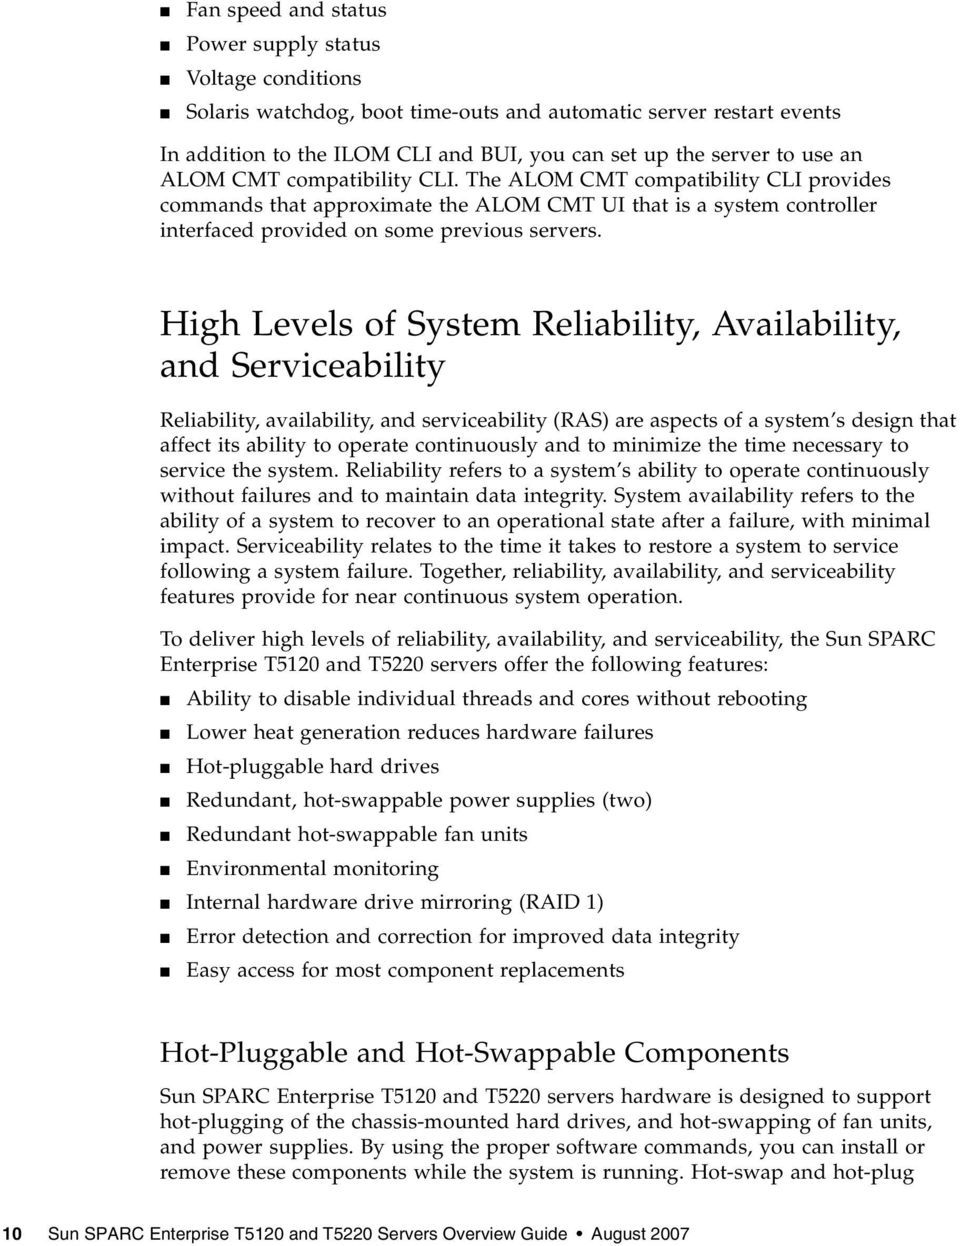 High Levels of System Reliability, Availability, and Serviceability Reliability, availability, and serviceability (RAS) are aspects of a system s design that affect its ability to operate